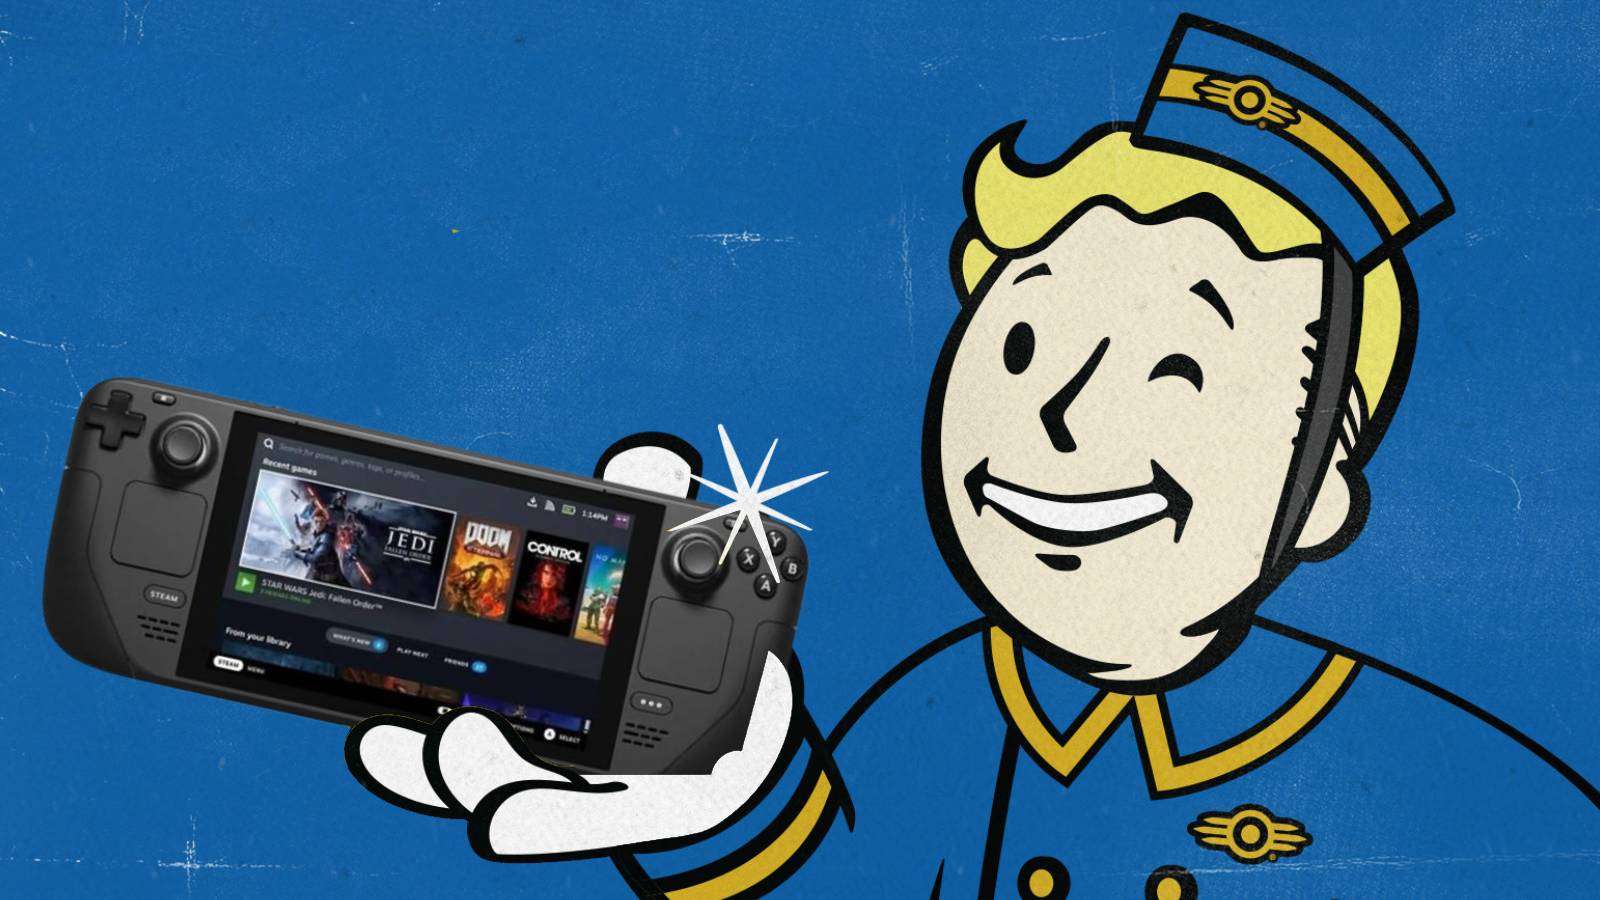 Image of Vault-Boy from the Fallout franchise, holding a Steam Deck.